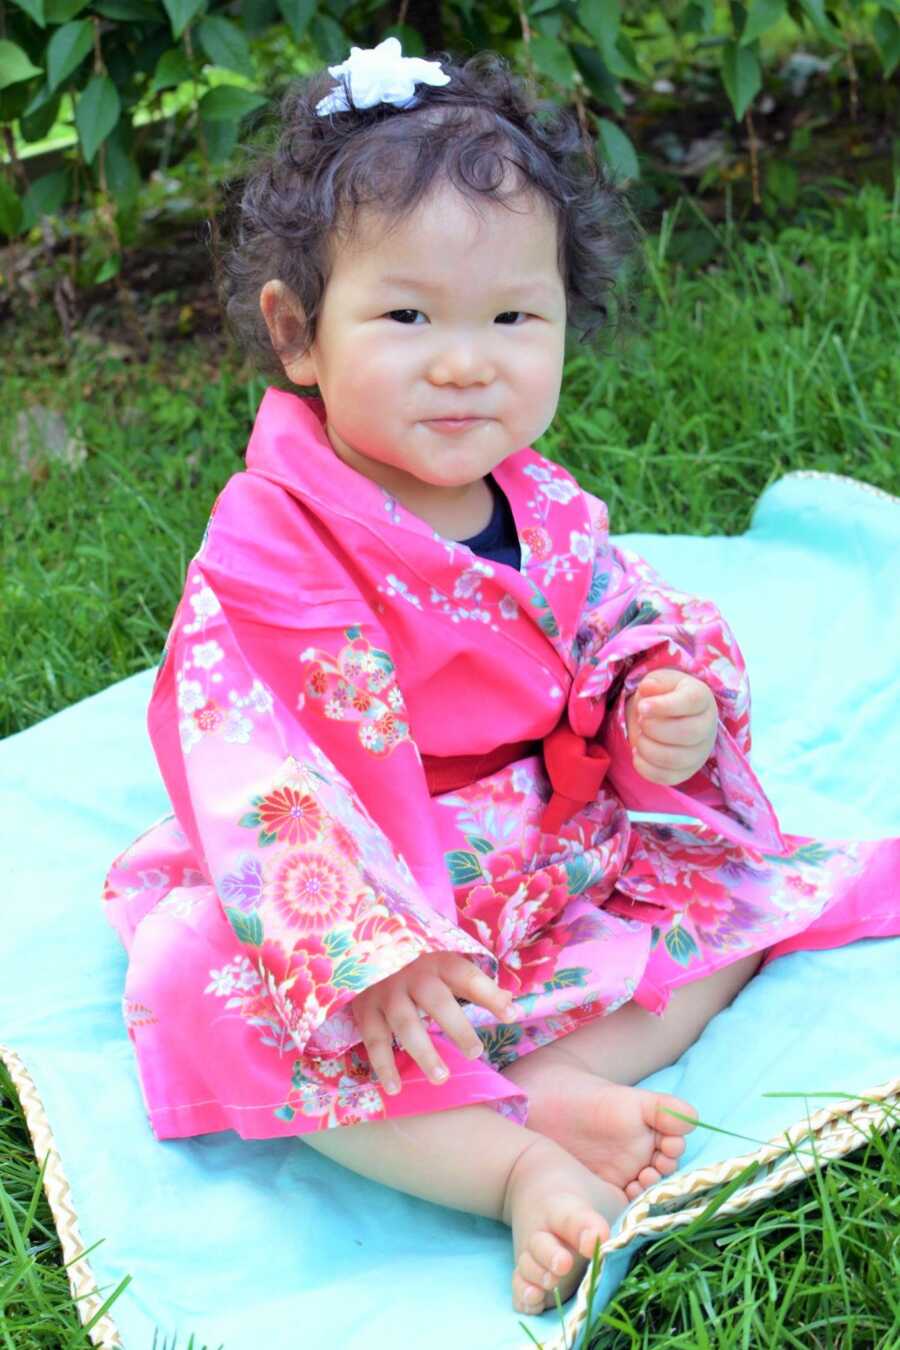 Everly sits on a blanket, wearing a traditional Japanese outfit. 